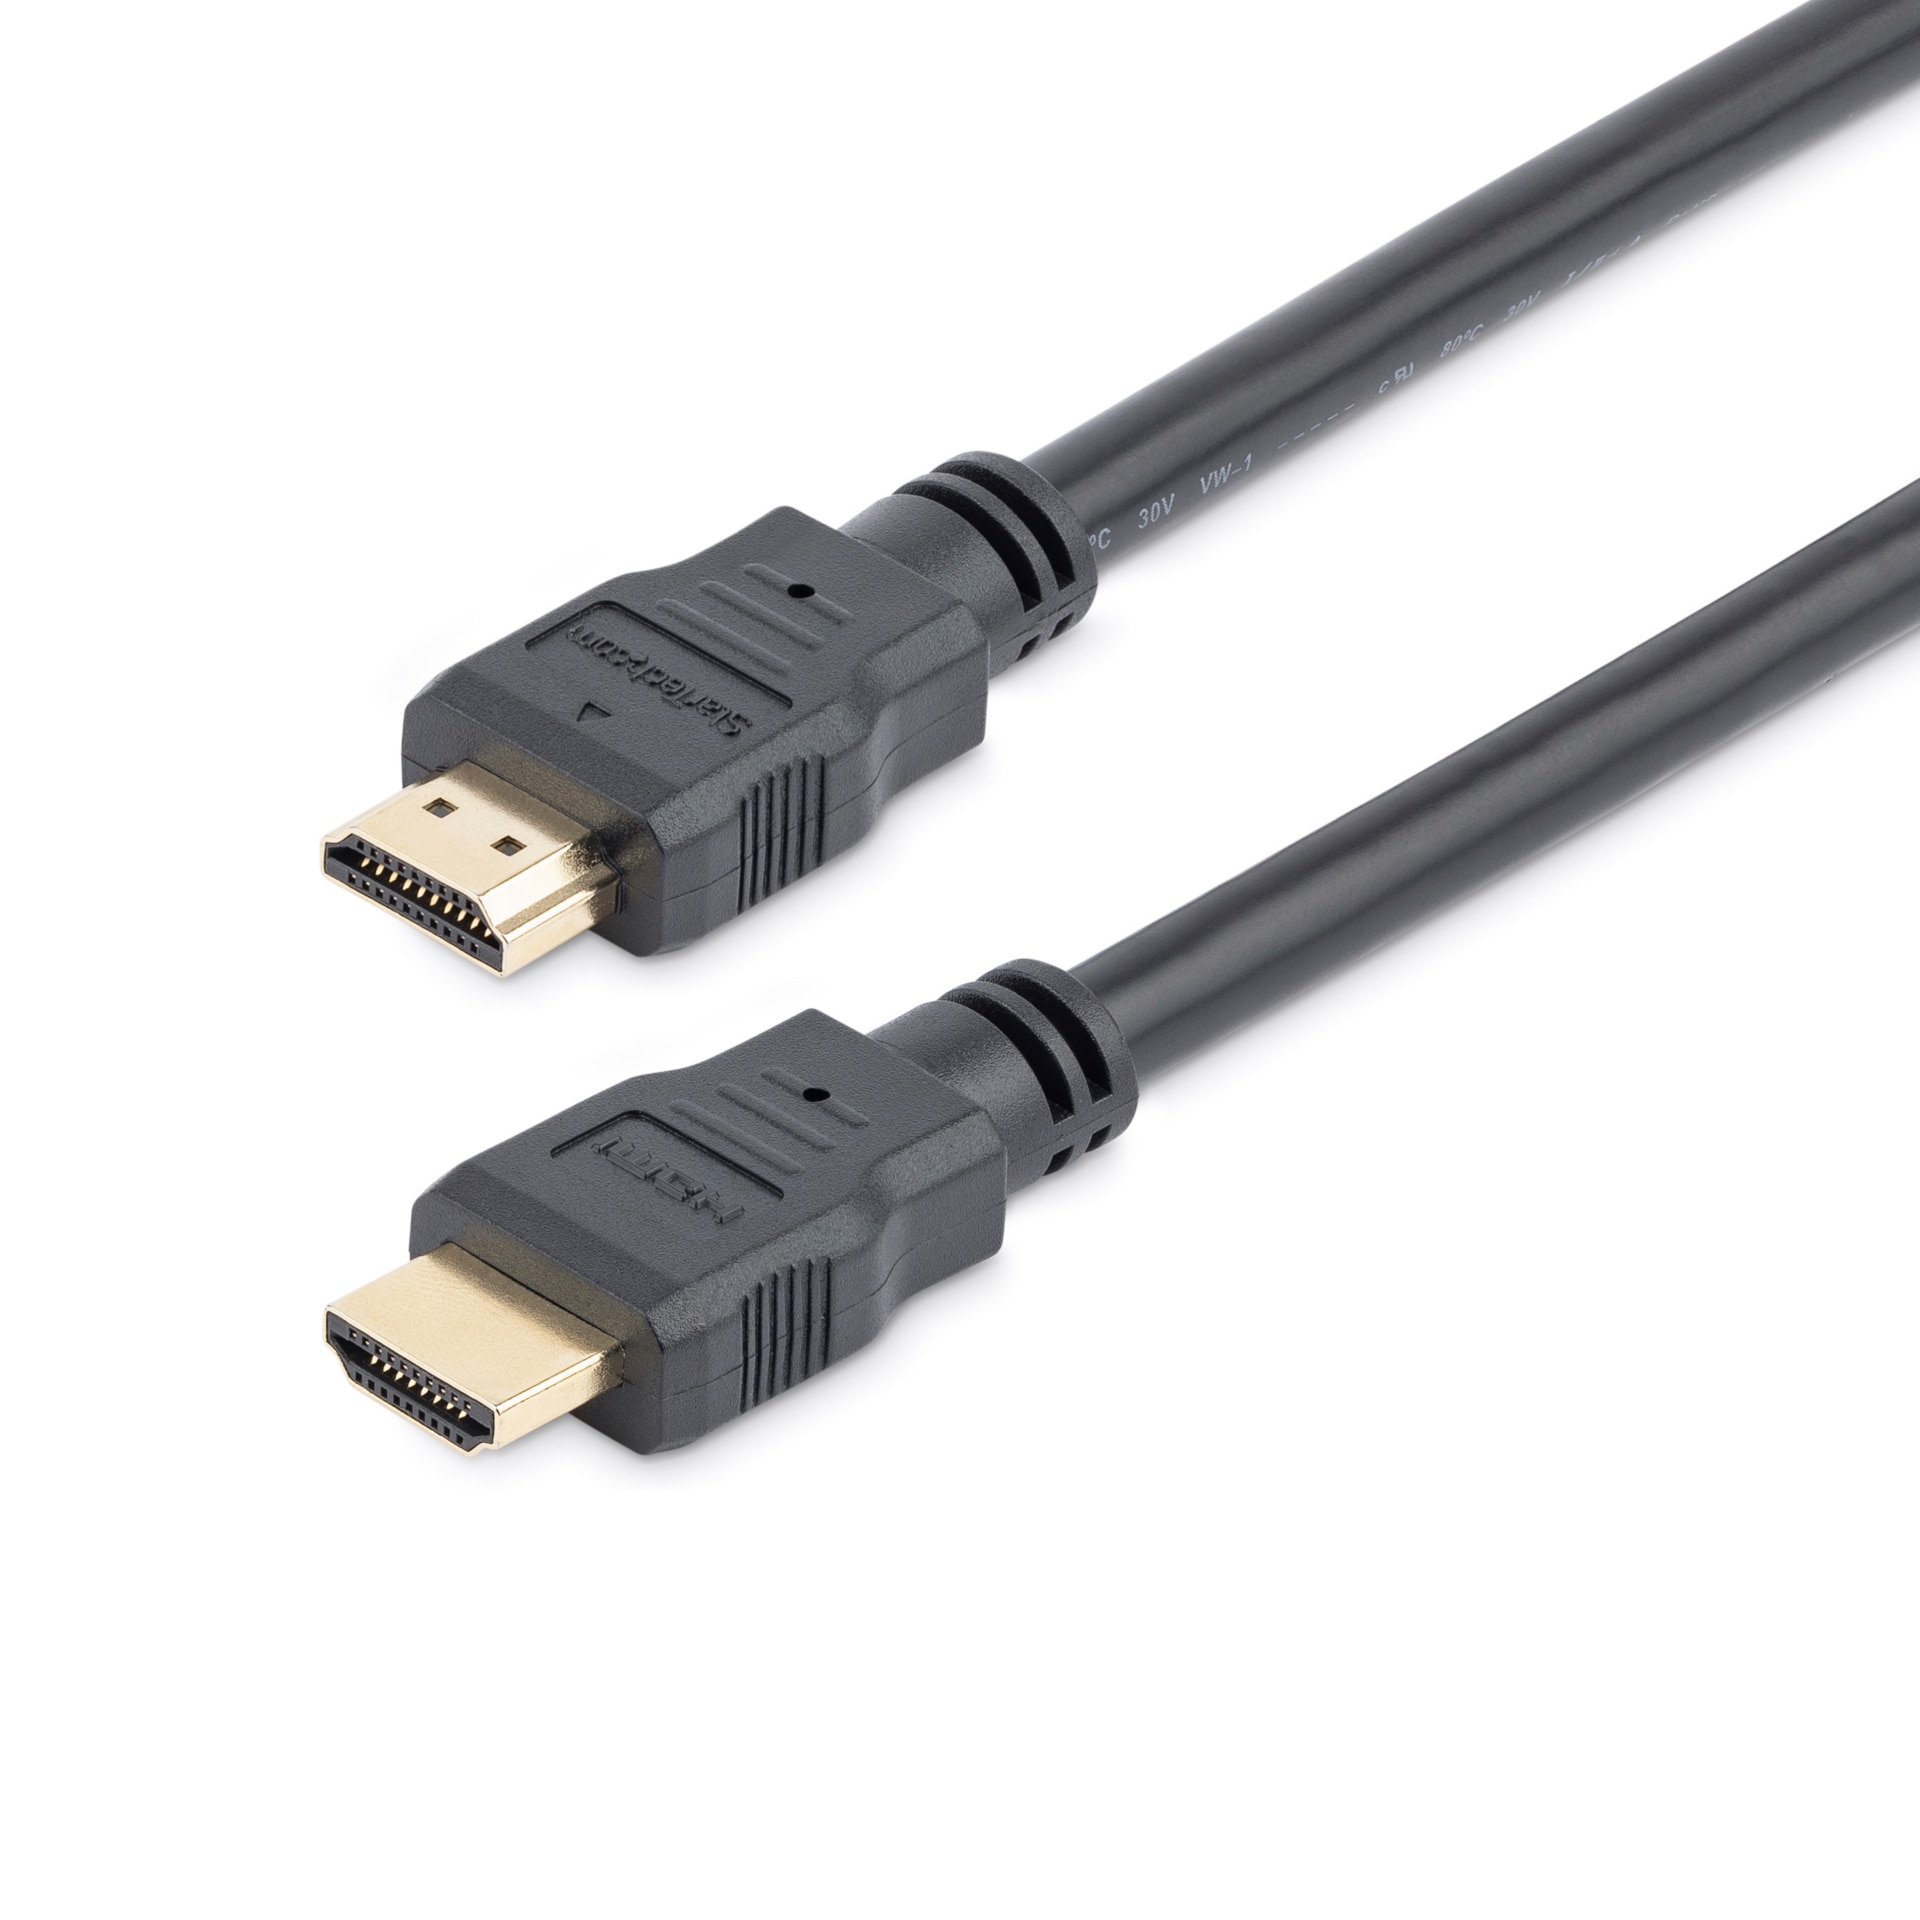 StarTech.com 3ft (1m) HDMI Cable - 4K High Speed HDMI 1.4 Cable w/ Ethernet - UHD HDMI Monitor Cord